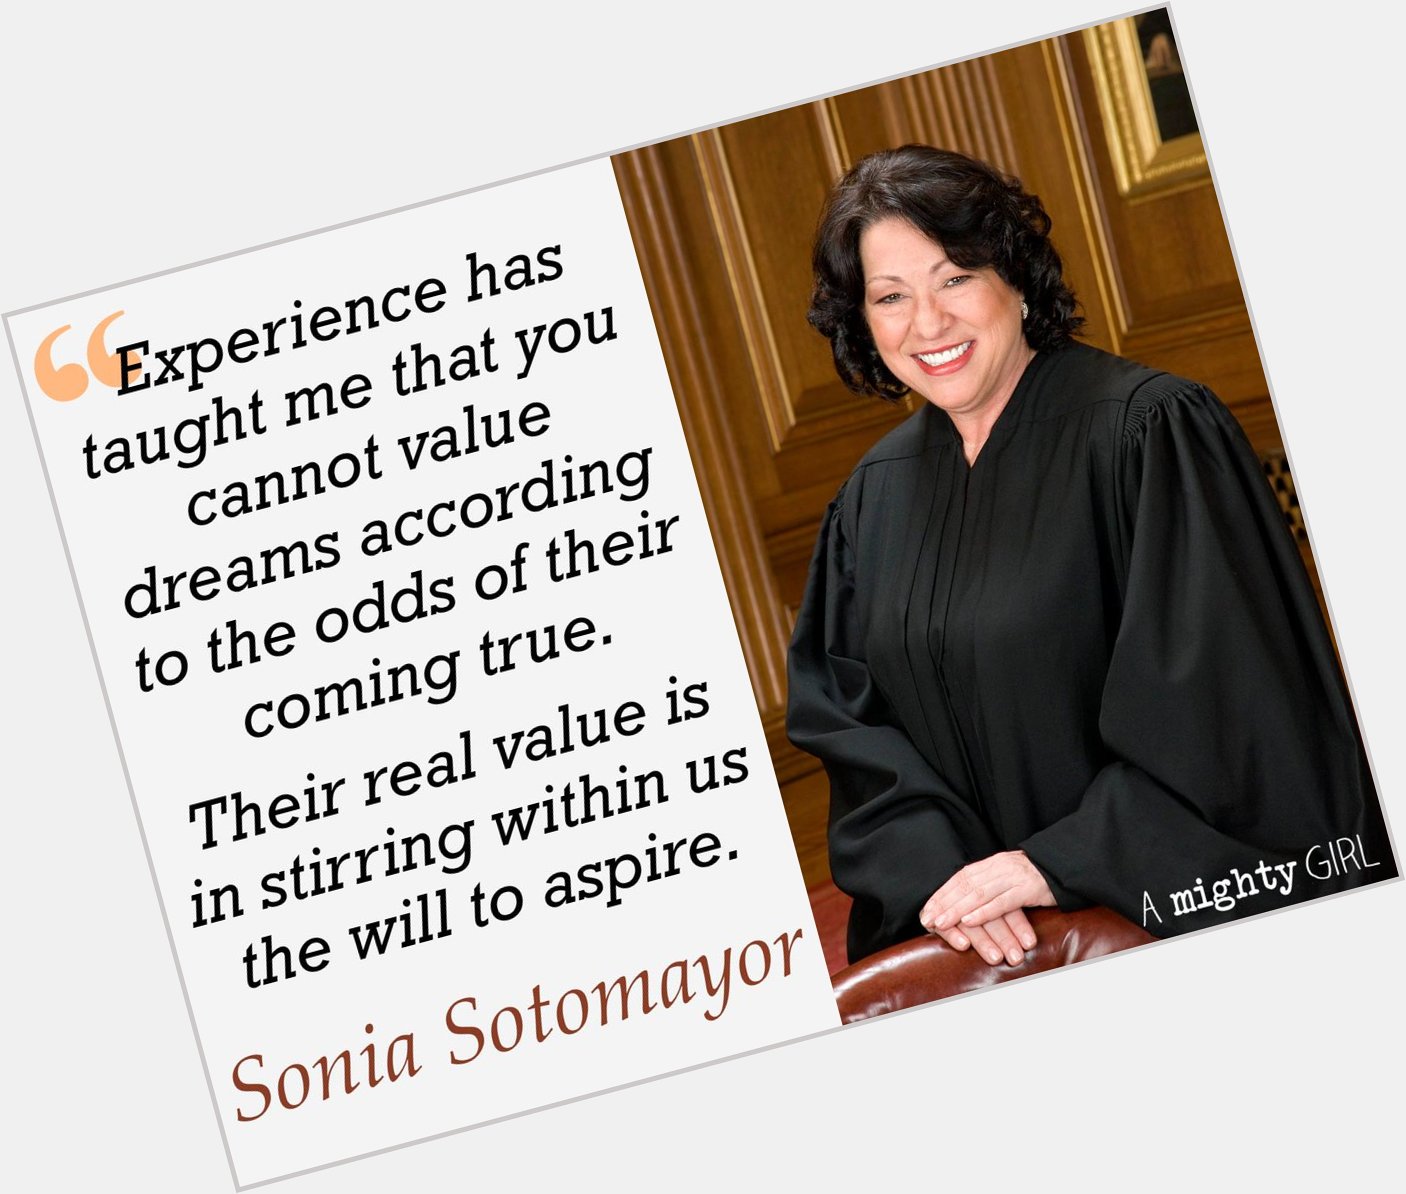 A Mighty Girl wishes a happy birthday to US Supreme Court justice Sonia Sotomayor!  